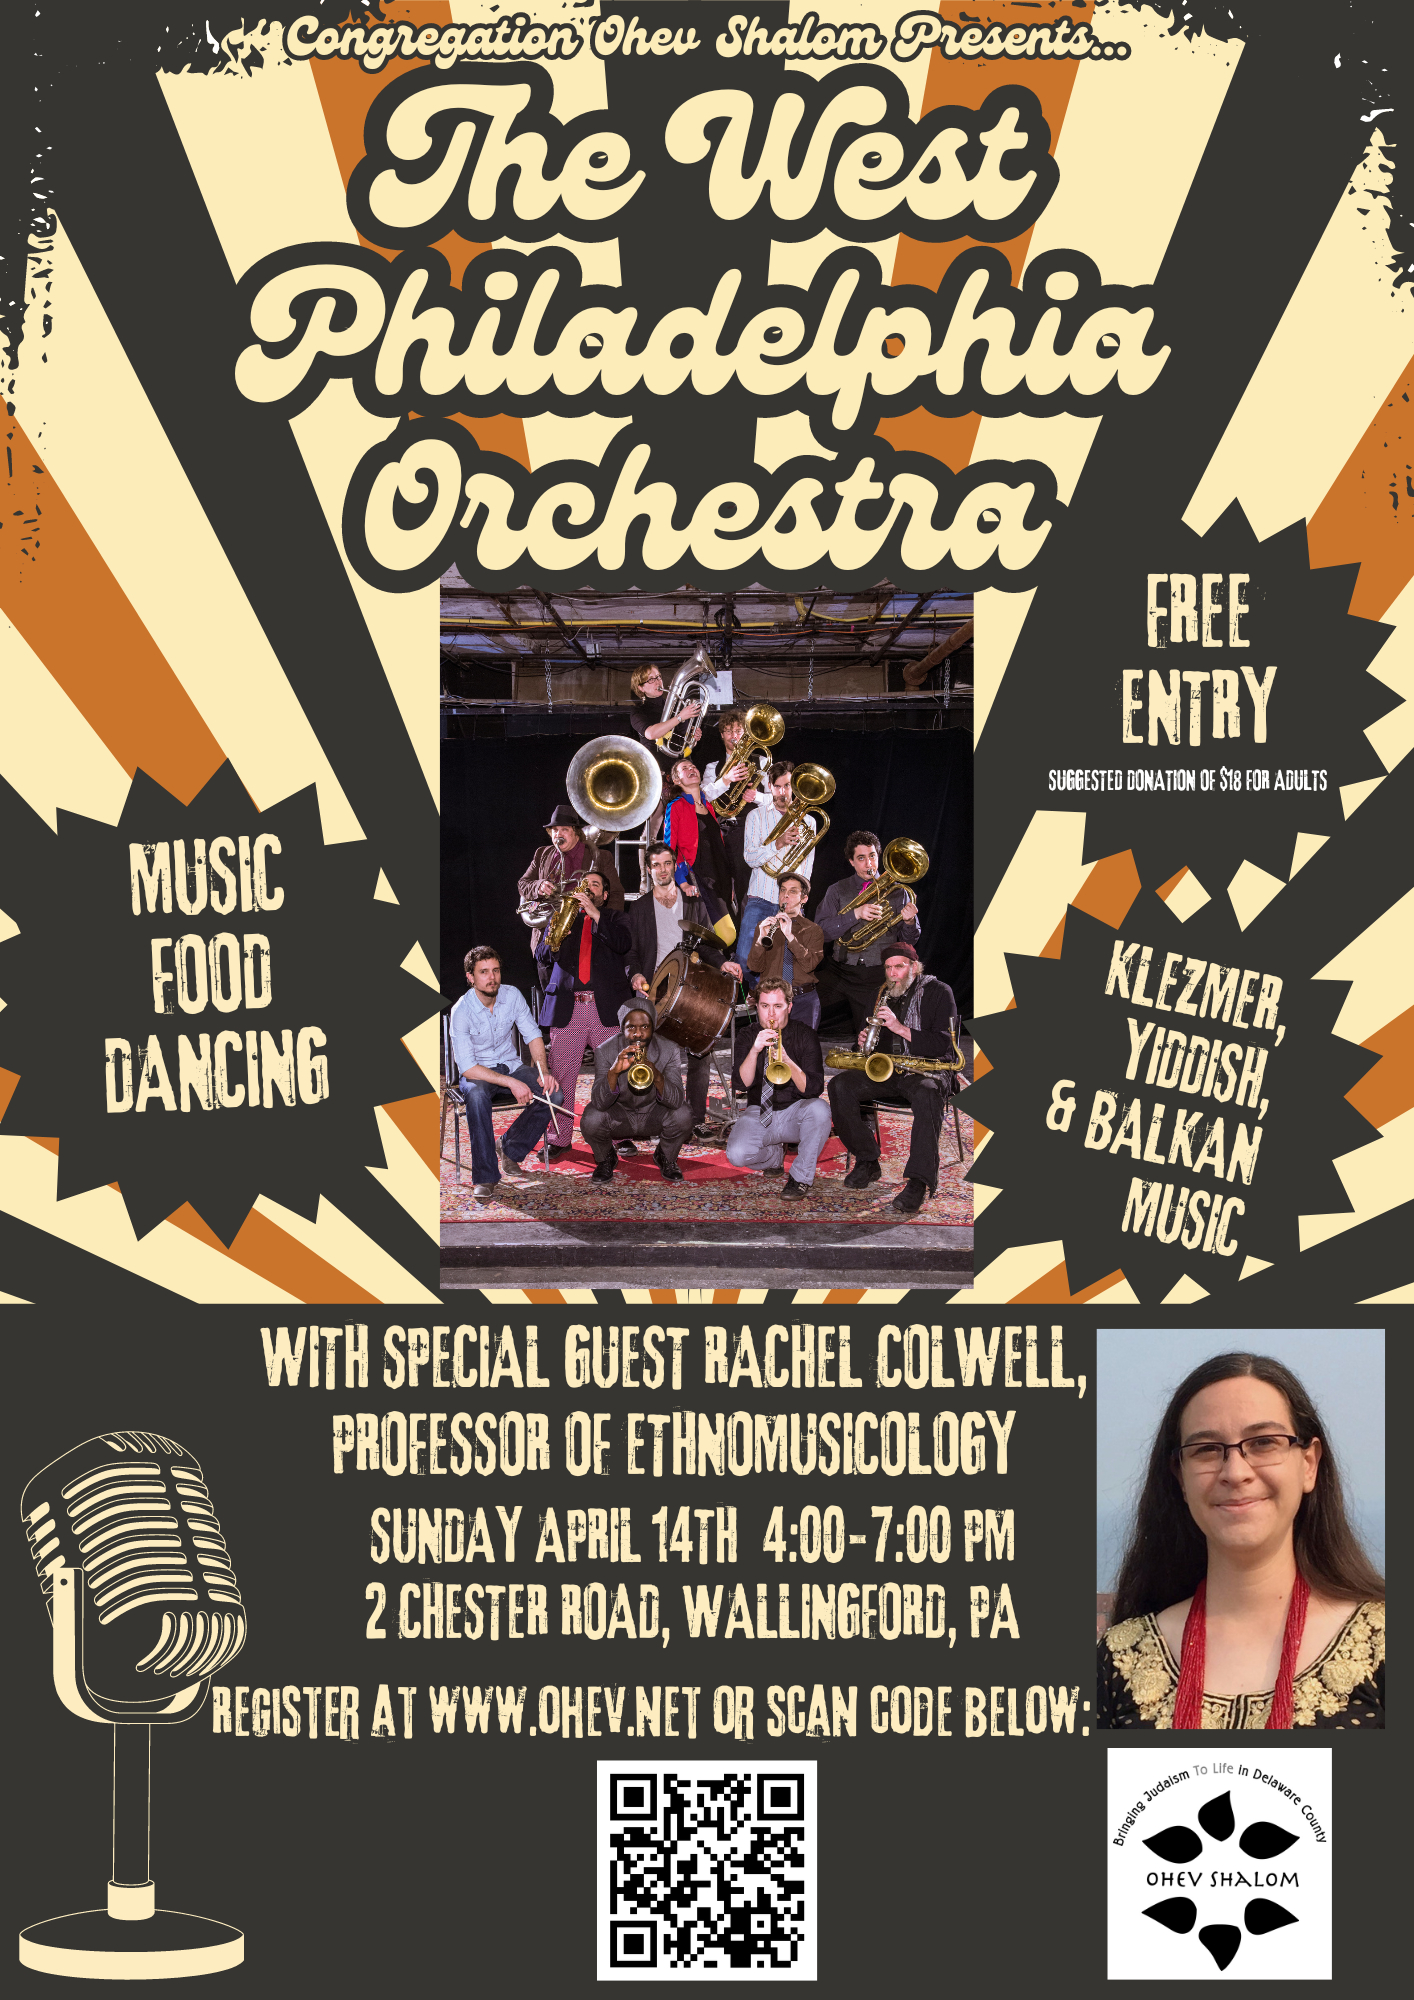 The West Philadelphia Orchestra & Rachel Colwell